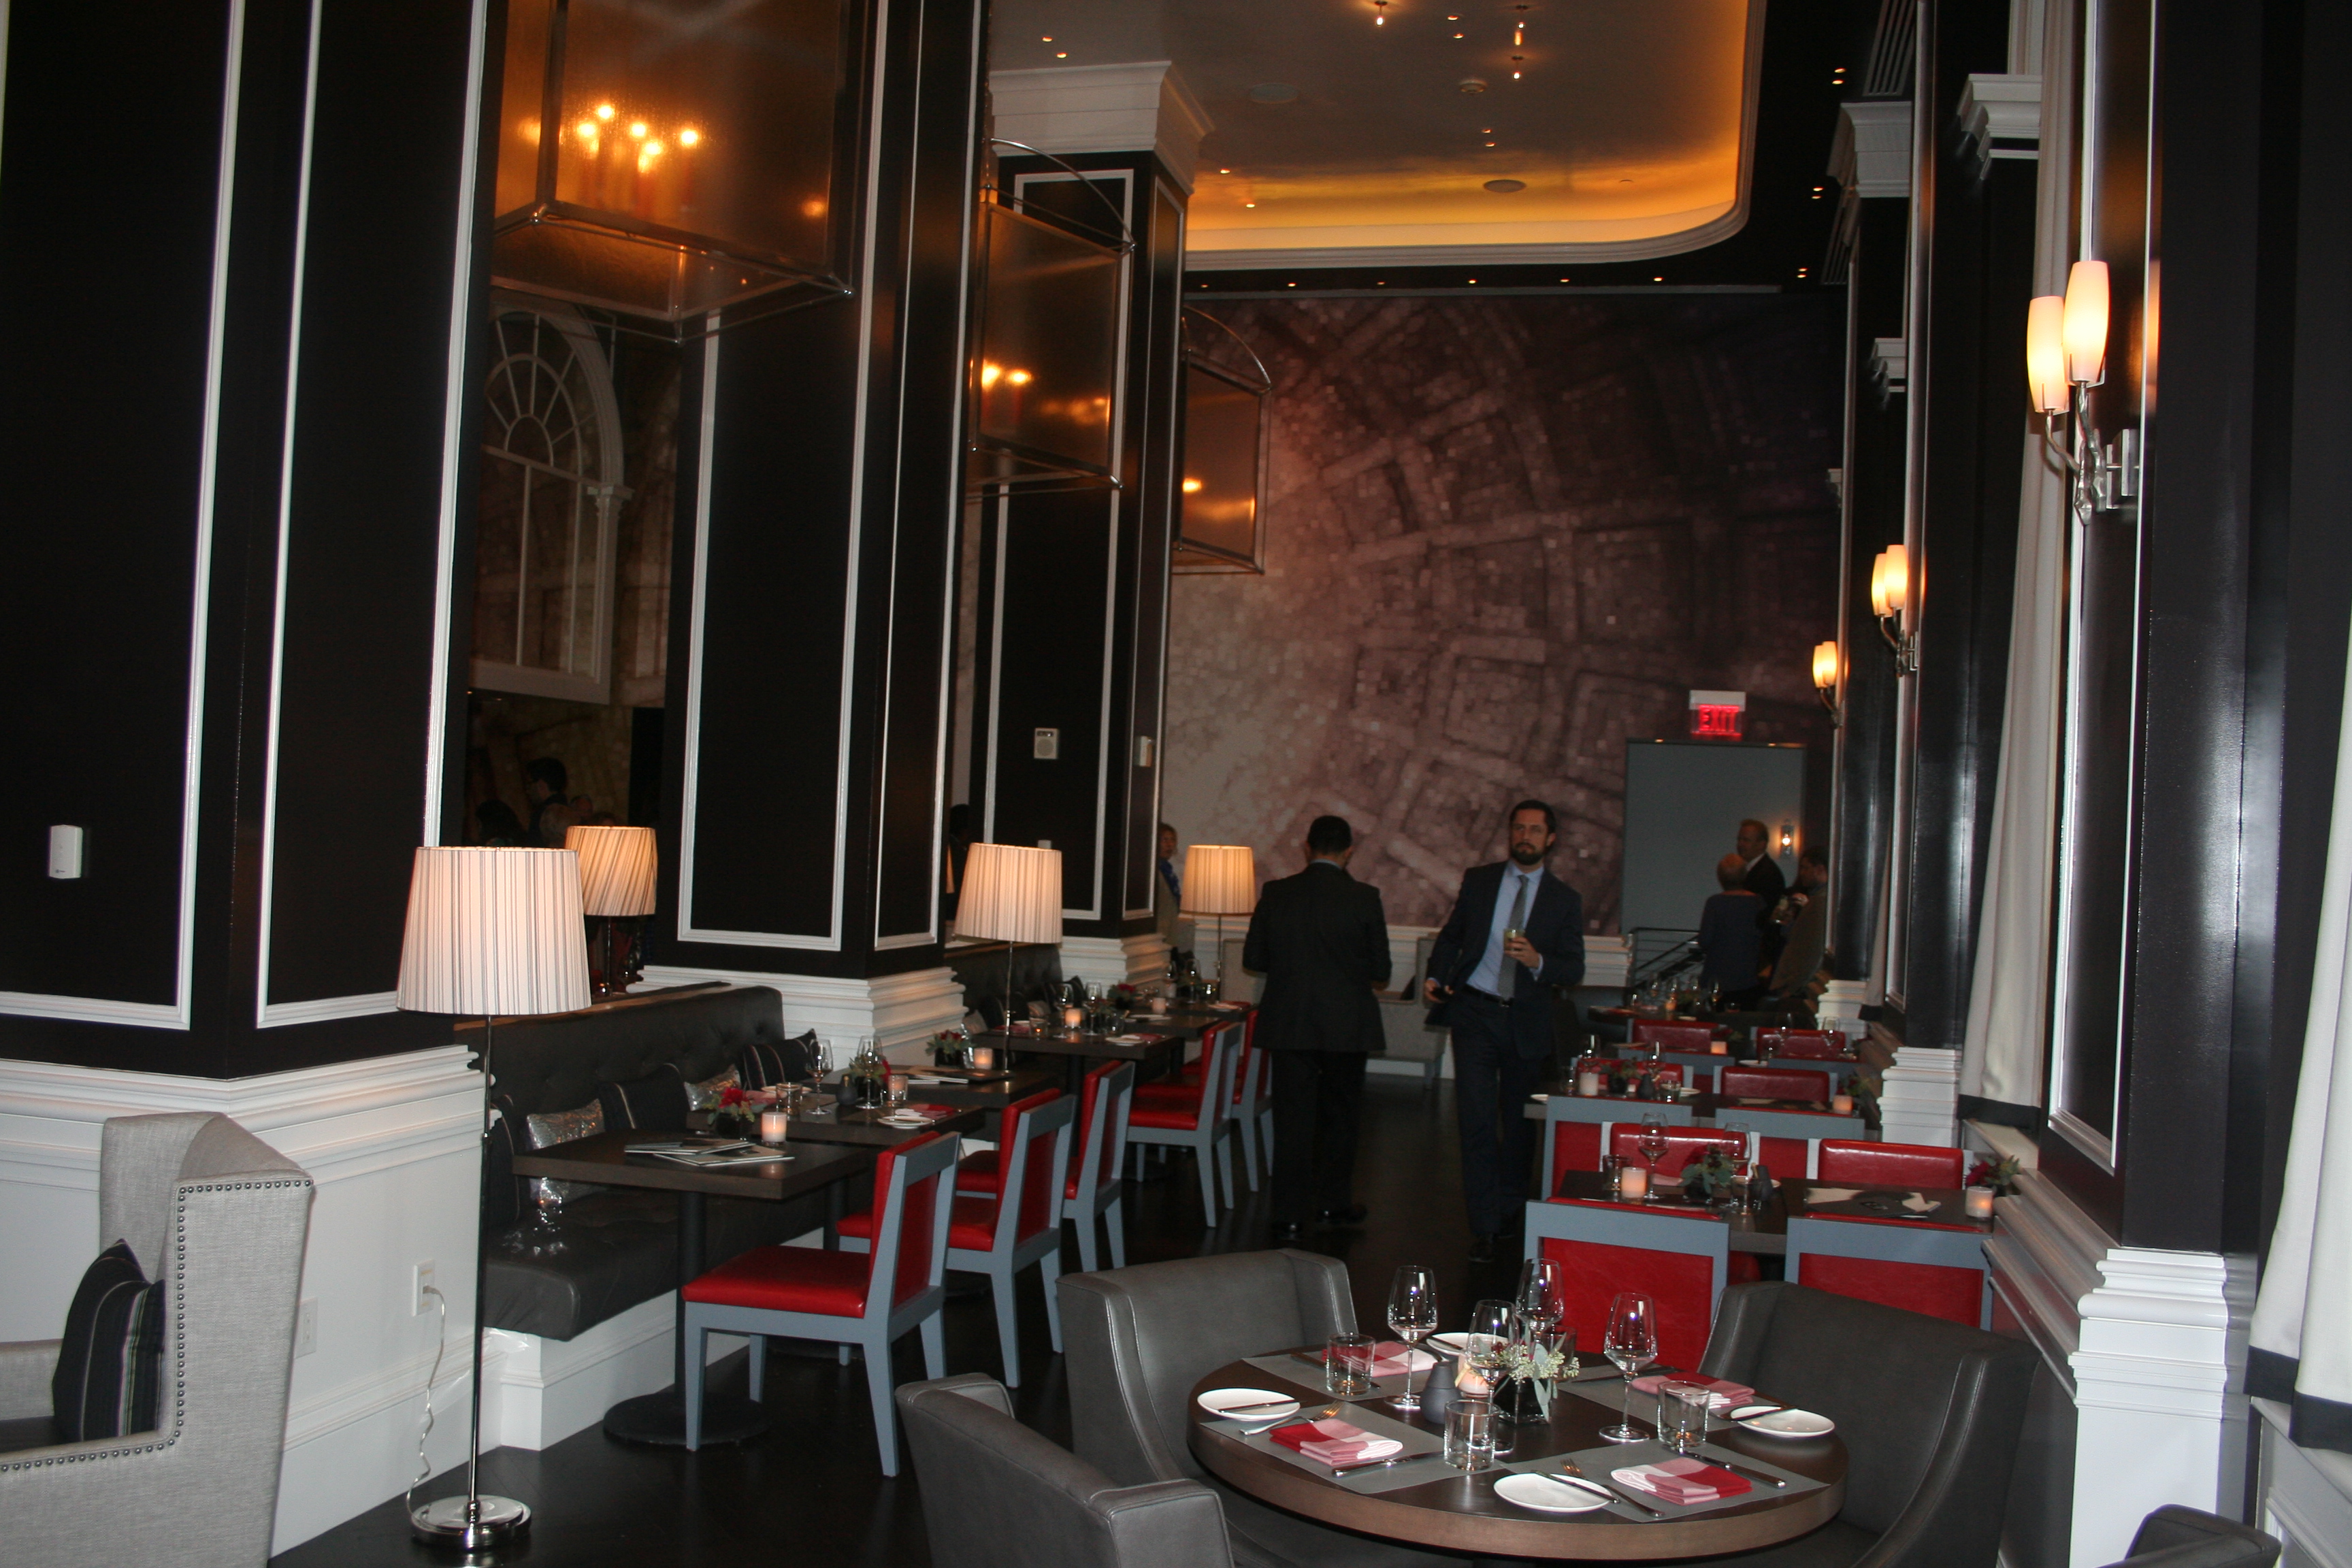 The remodeled dining room at J&G Steakhouse features black walls with red, white and gray accents. (Mark Heckathorn/DC on Heels)